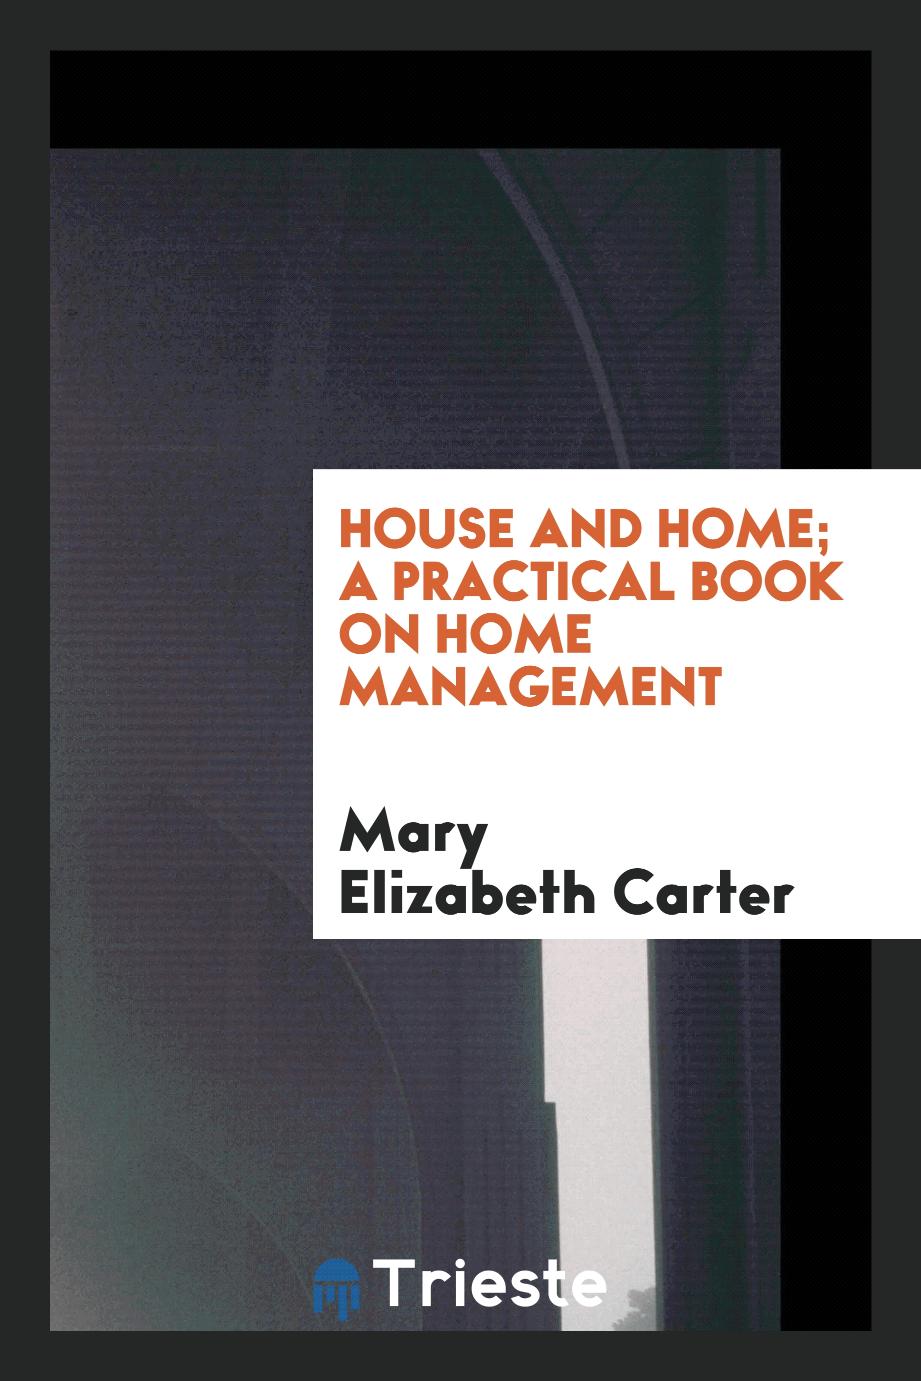 House and home; a practical book on home management